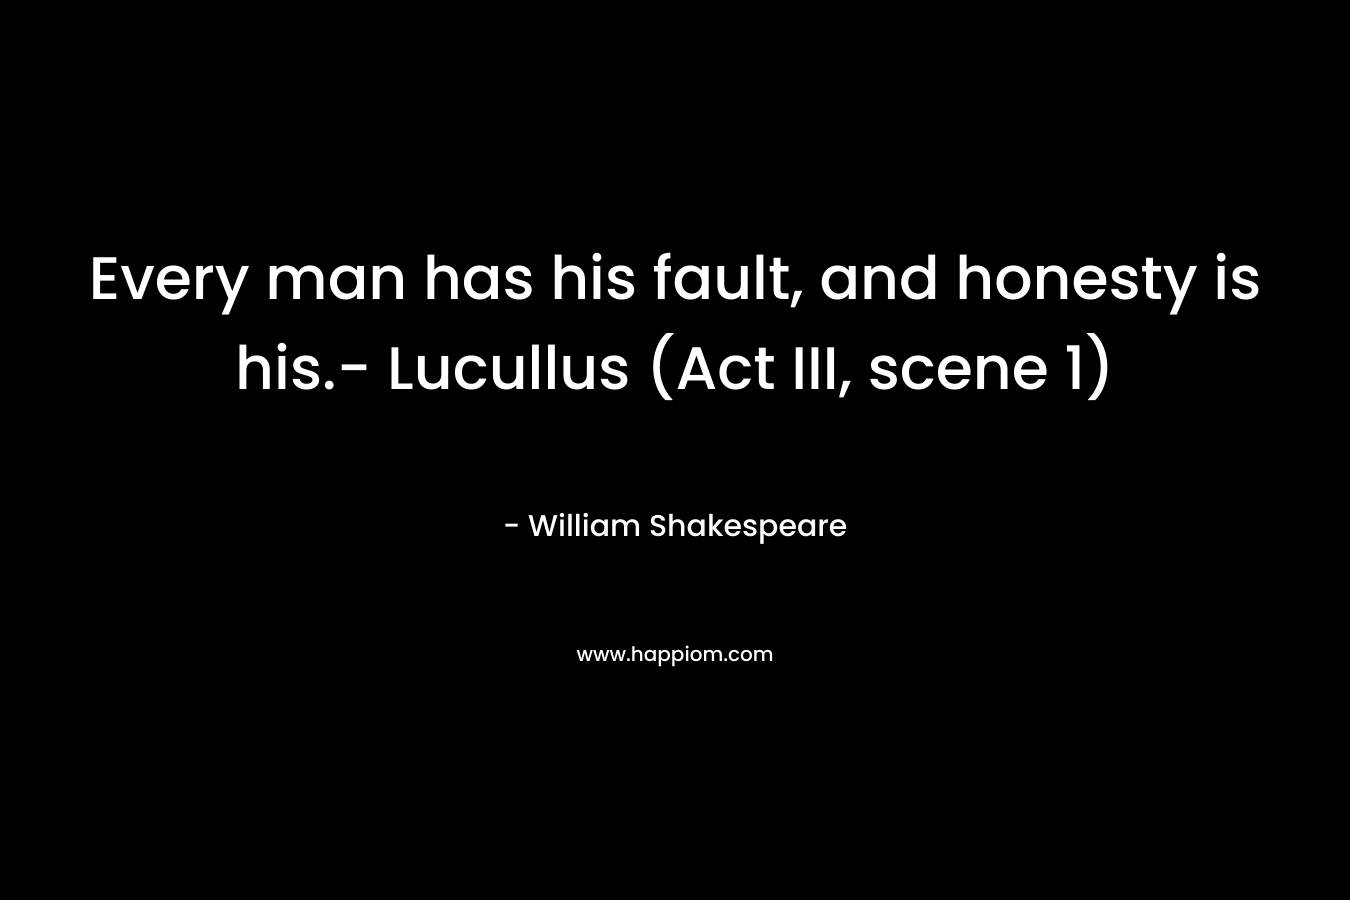 Every man has his fault, and honesty is his.- Lucullus (Act III, scene 1) – William Shakespeare